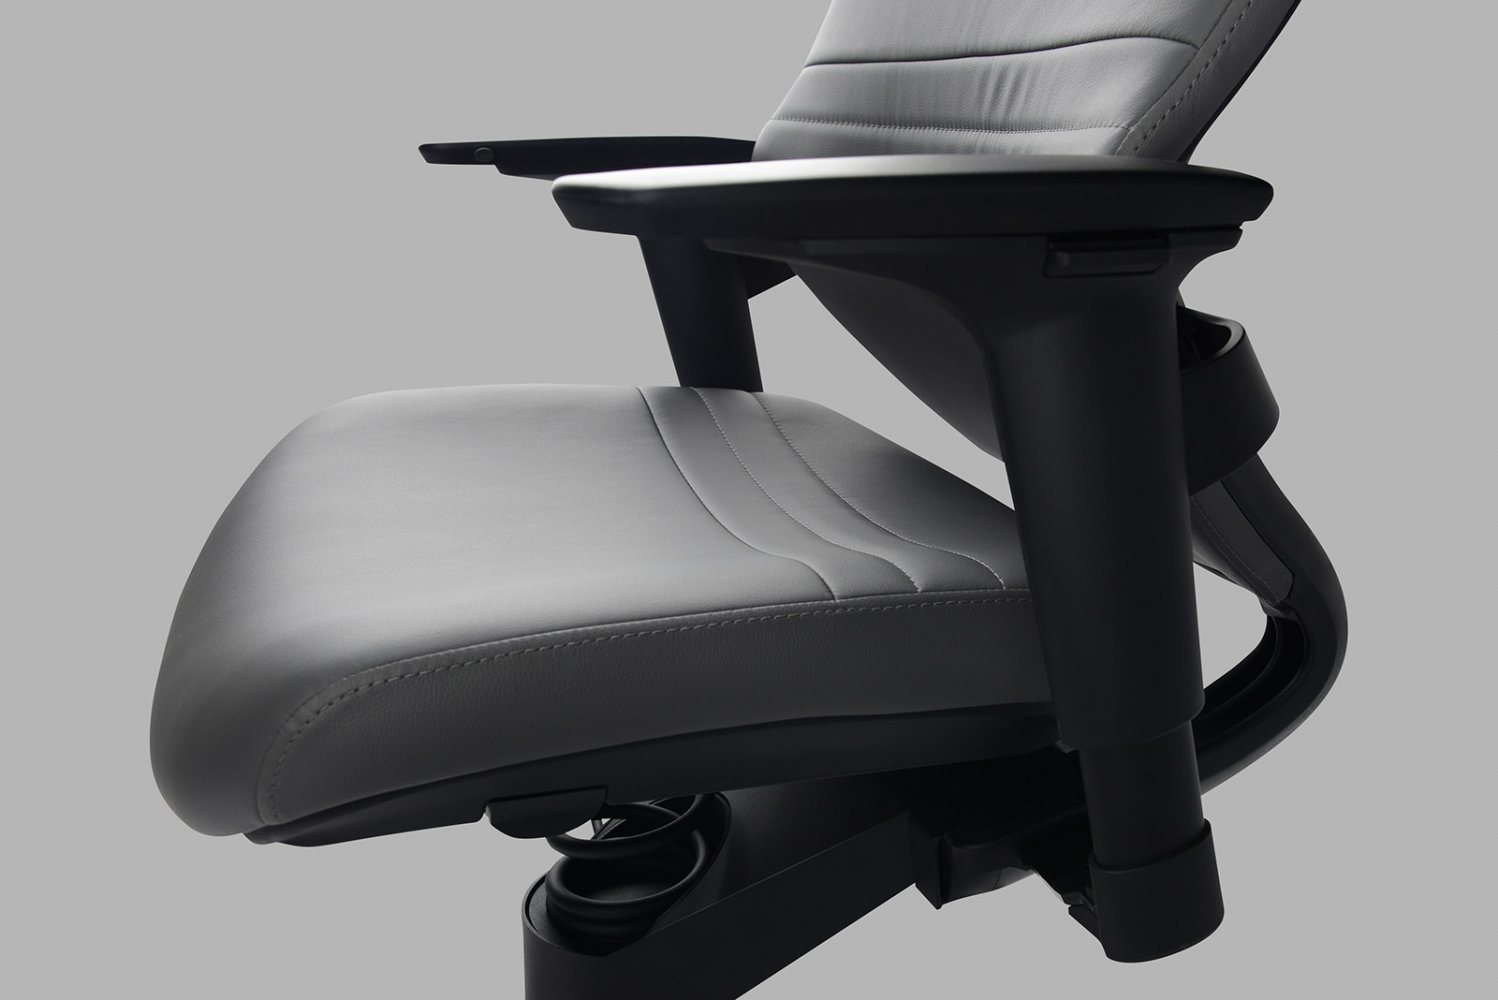 Adaptic STYLE - Medical office chair for pain-free sitting